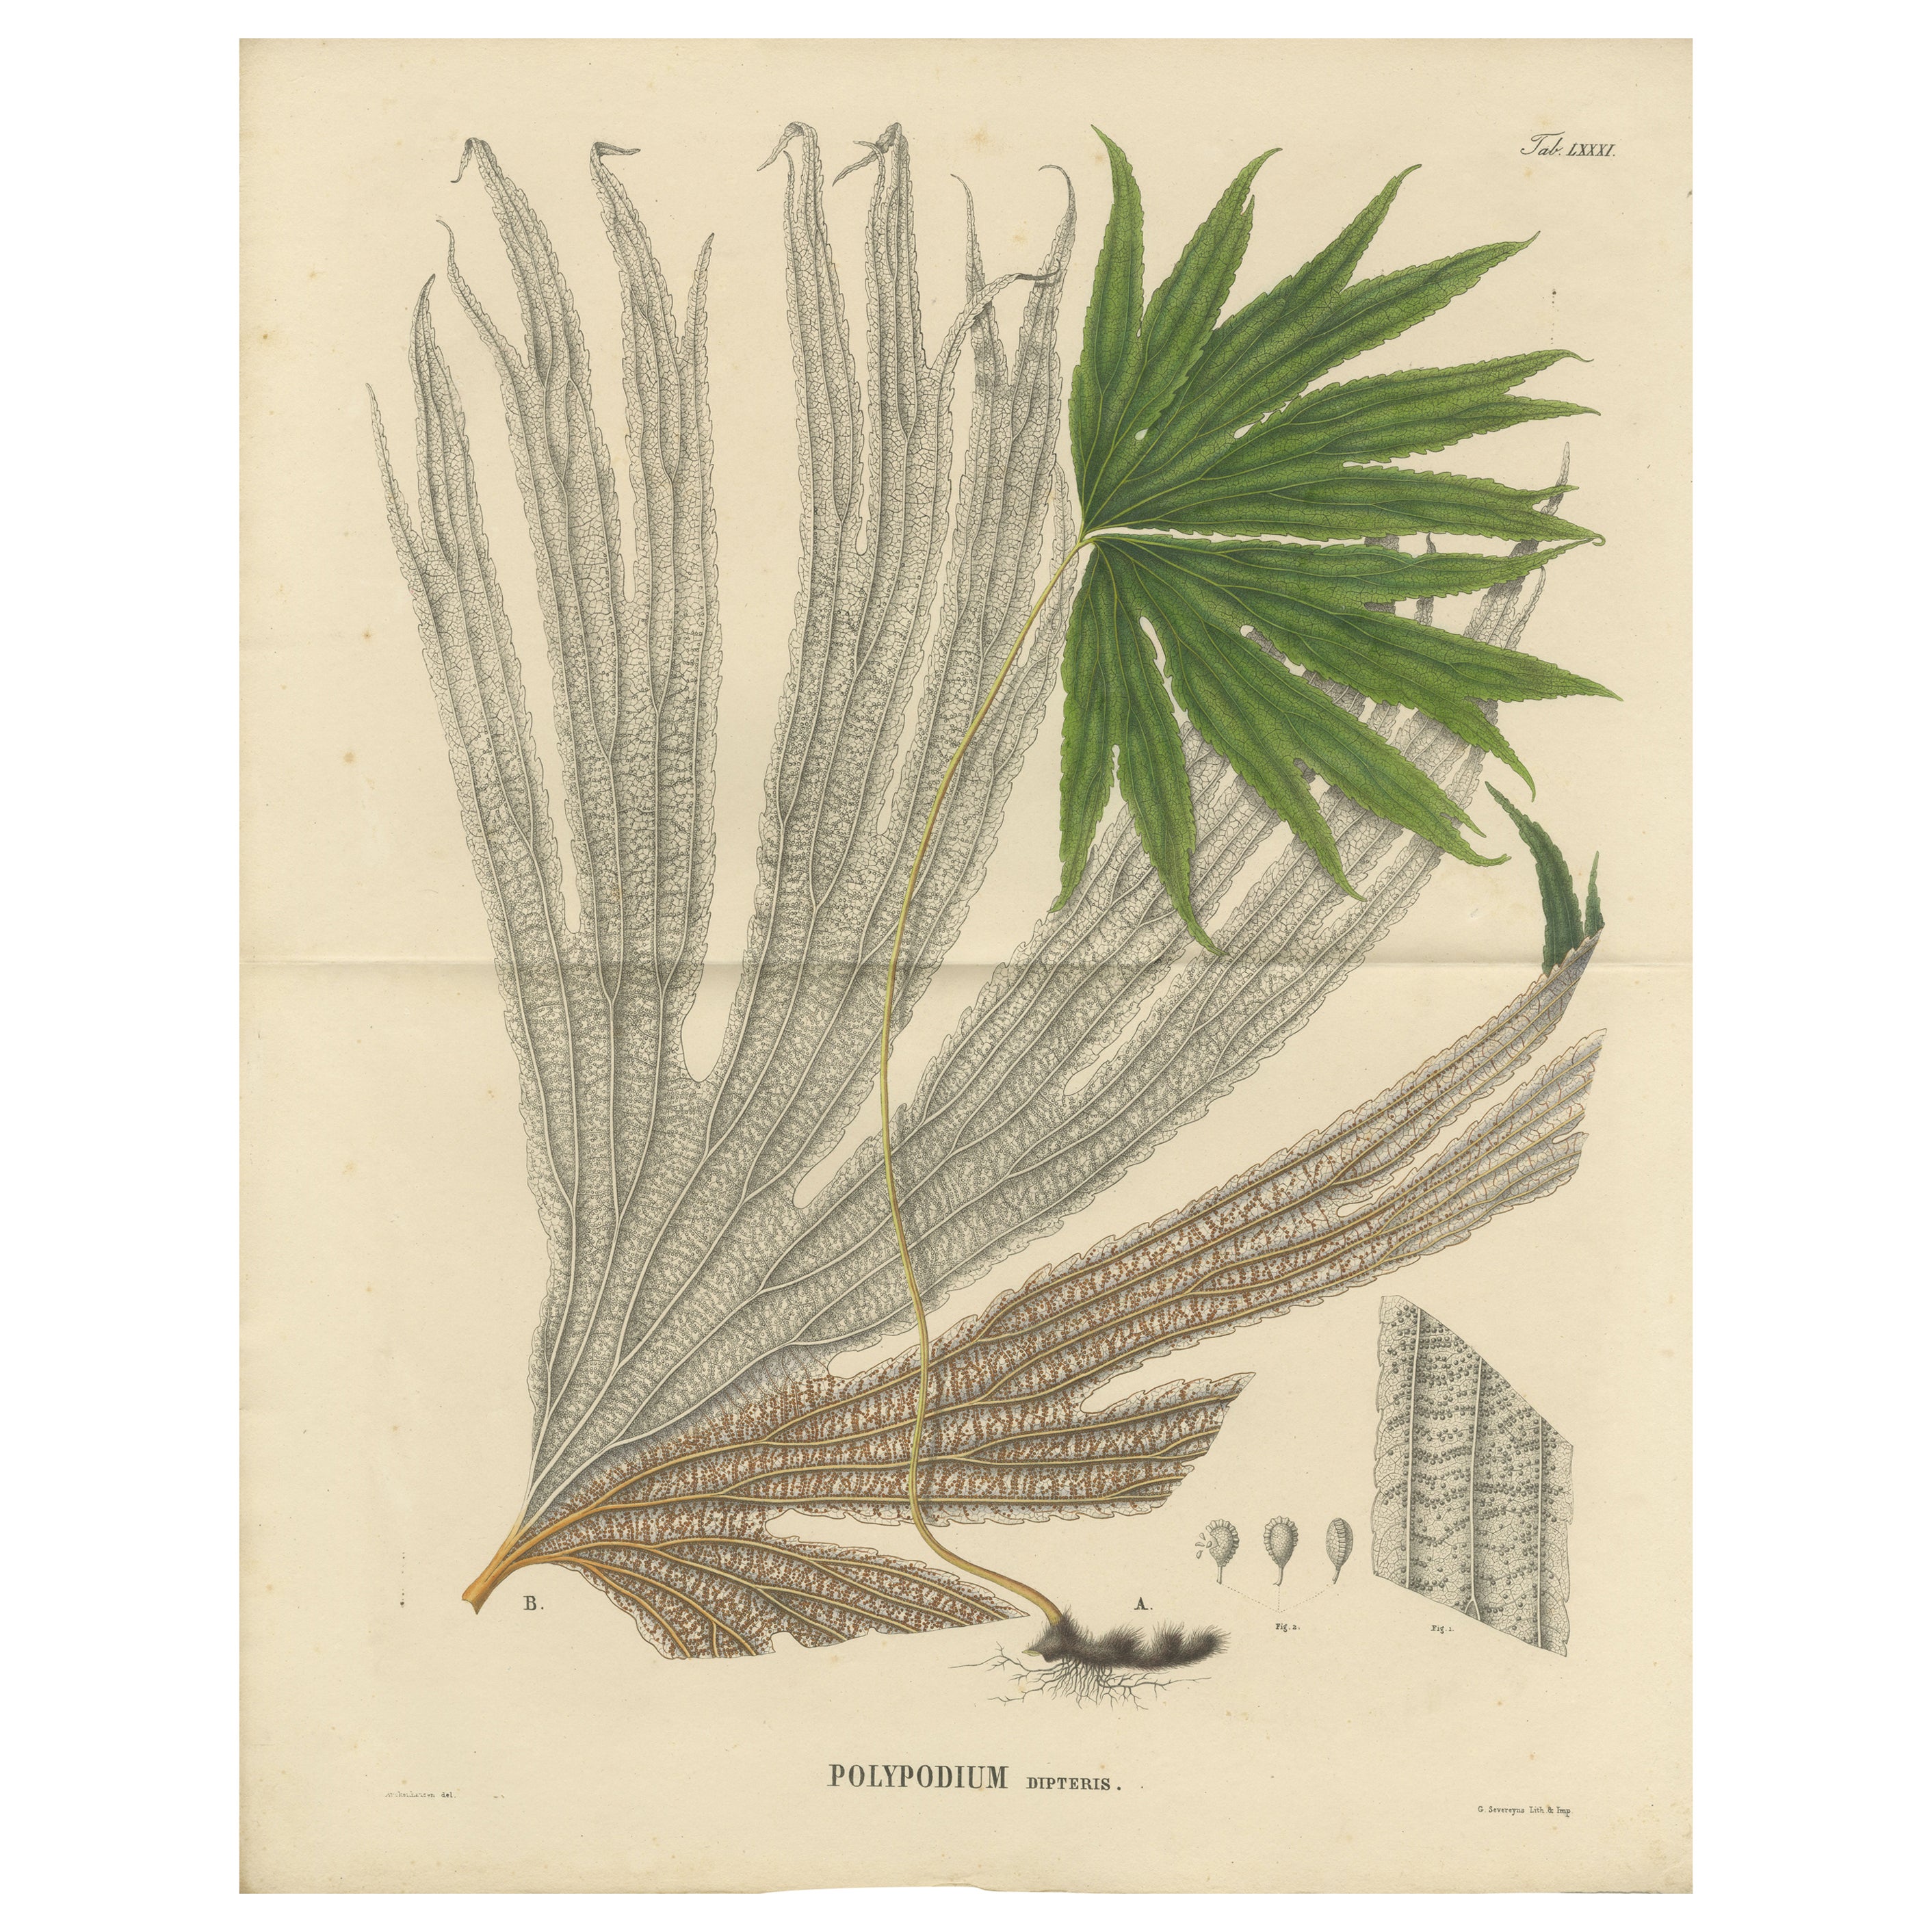 Large, Uniquely Handcolored Lithograph of Ferns of Indonesia 'Polypodium', 1829 